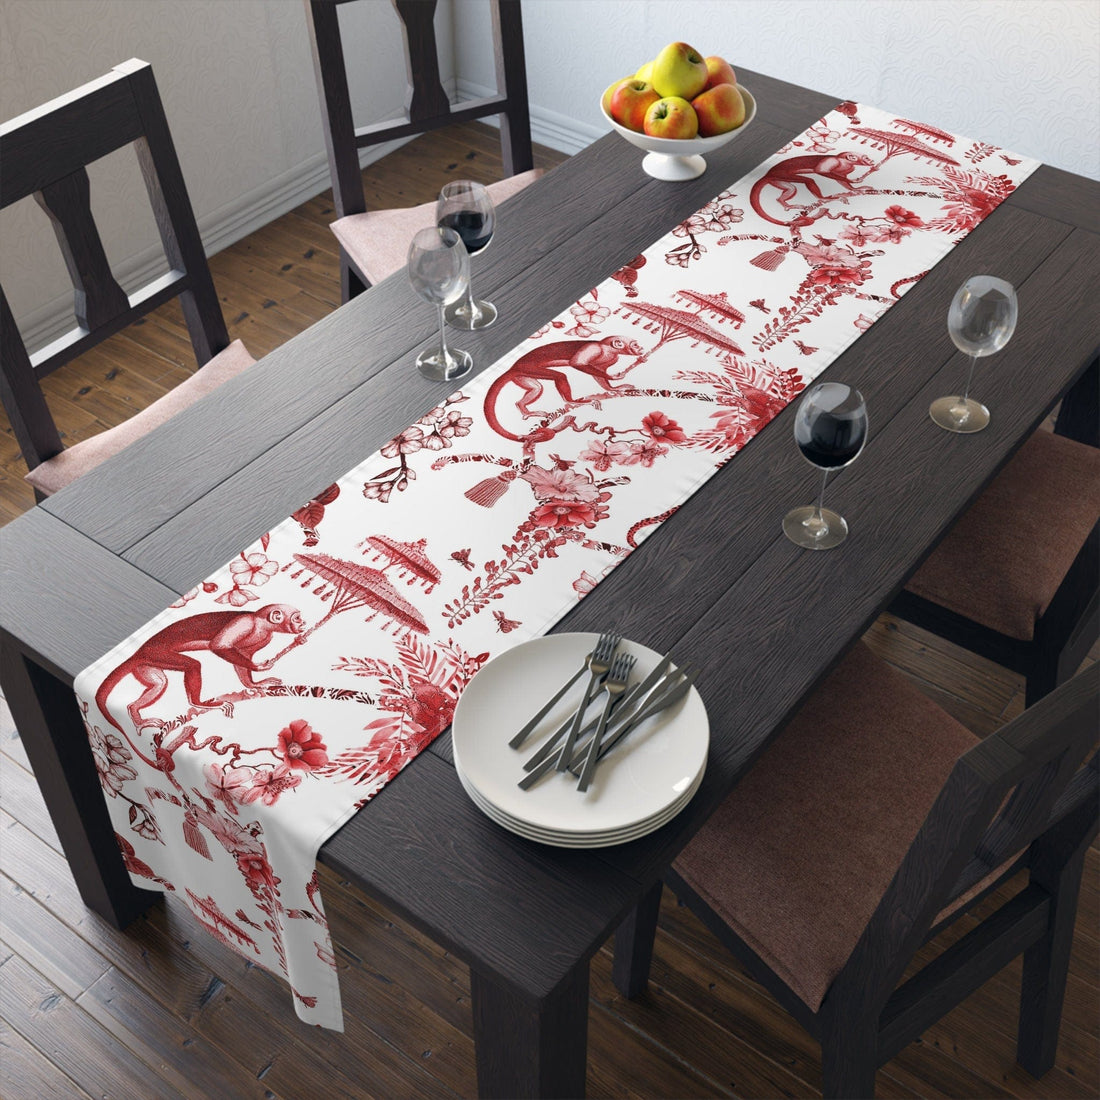 Kate McEnroe New York Chinoiserie Jungle Botanical Toile Table Runner, Red, White Chinoiserie Floral Table Linens , Country Farmhouse Table Decor - 131782623Table Runners24339001434271510791